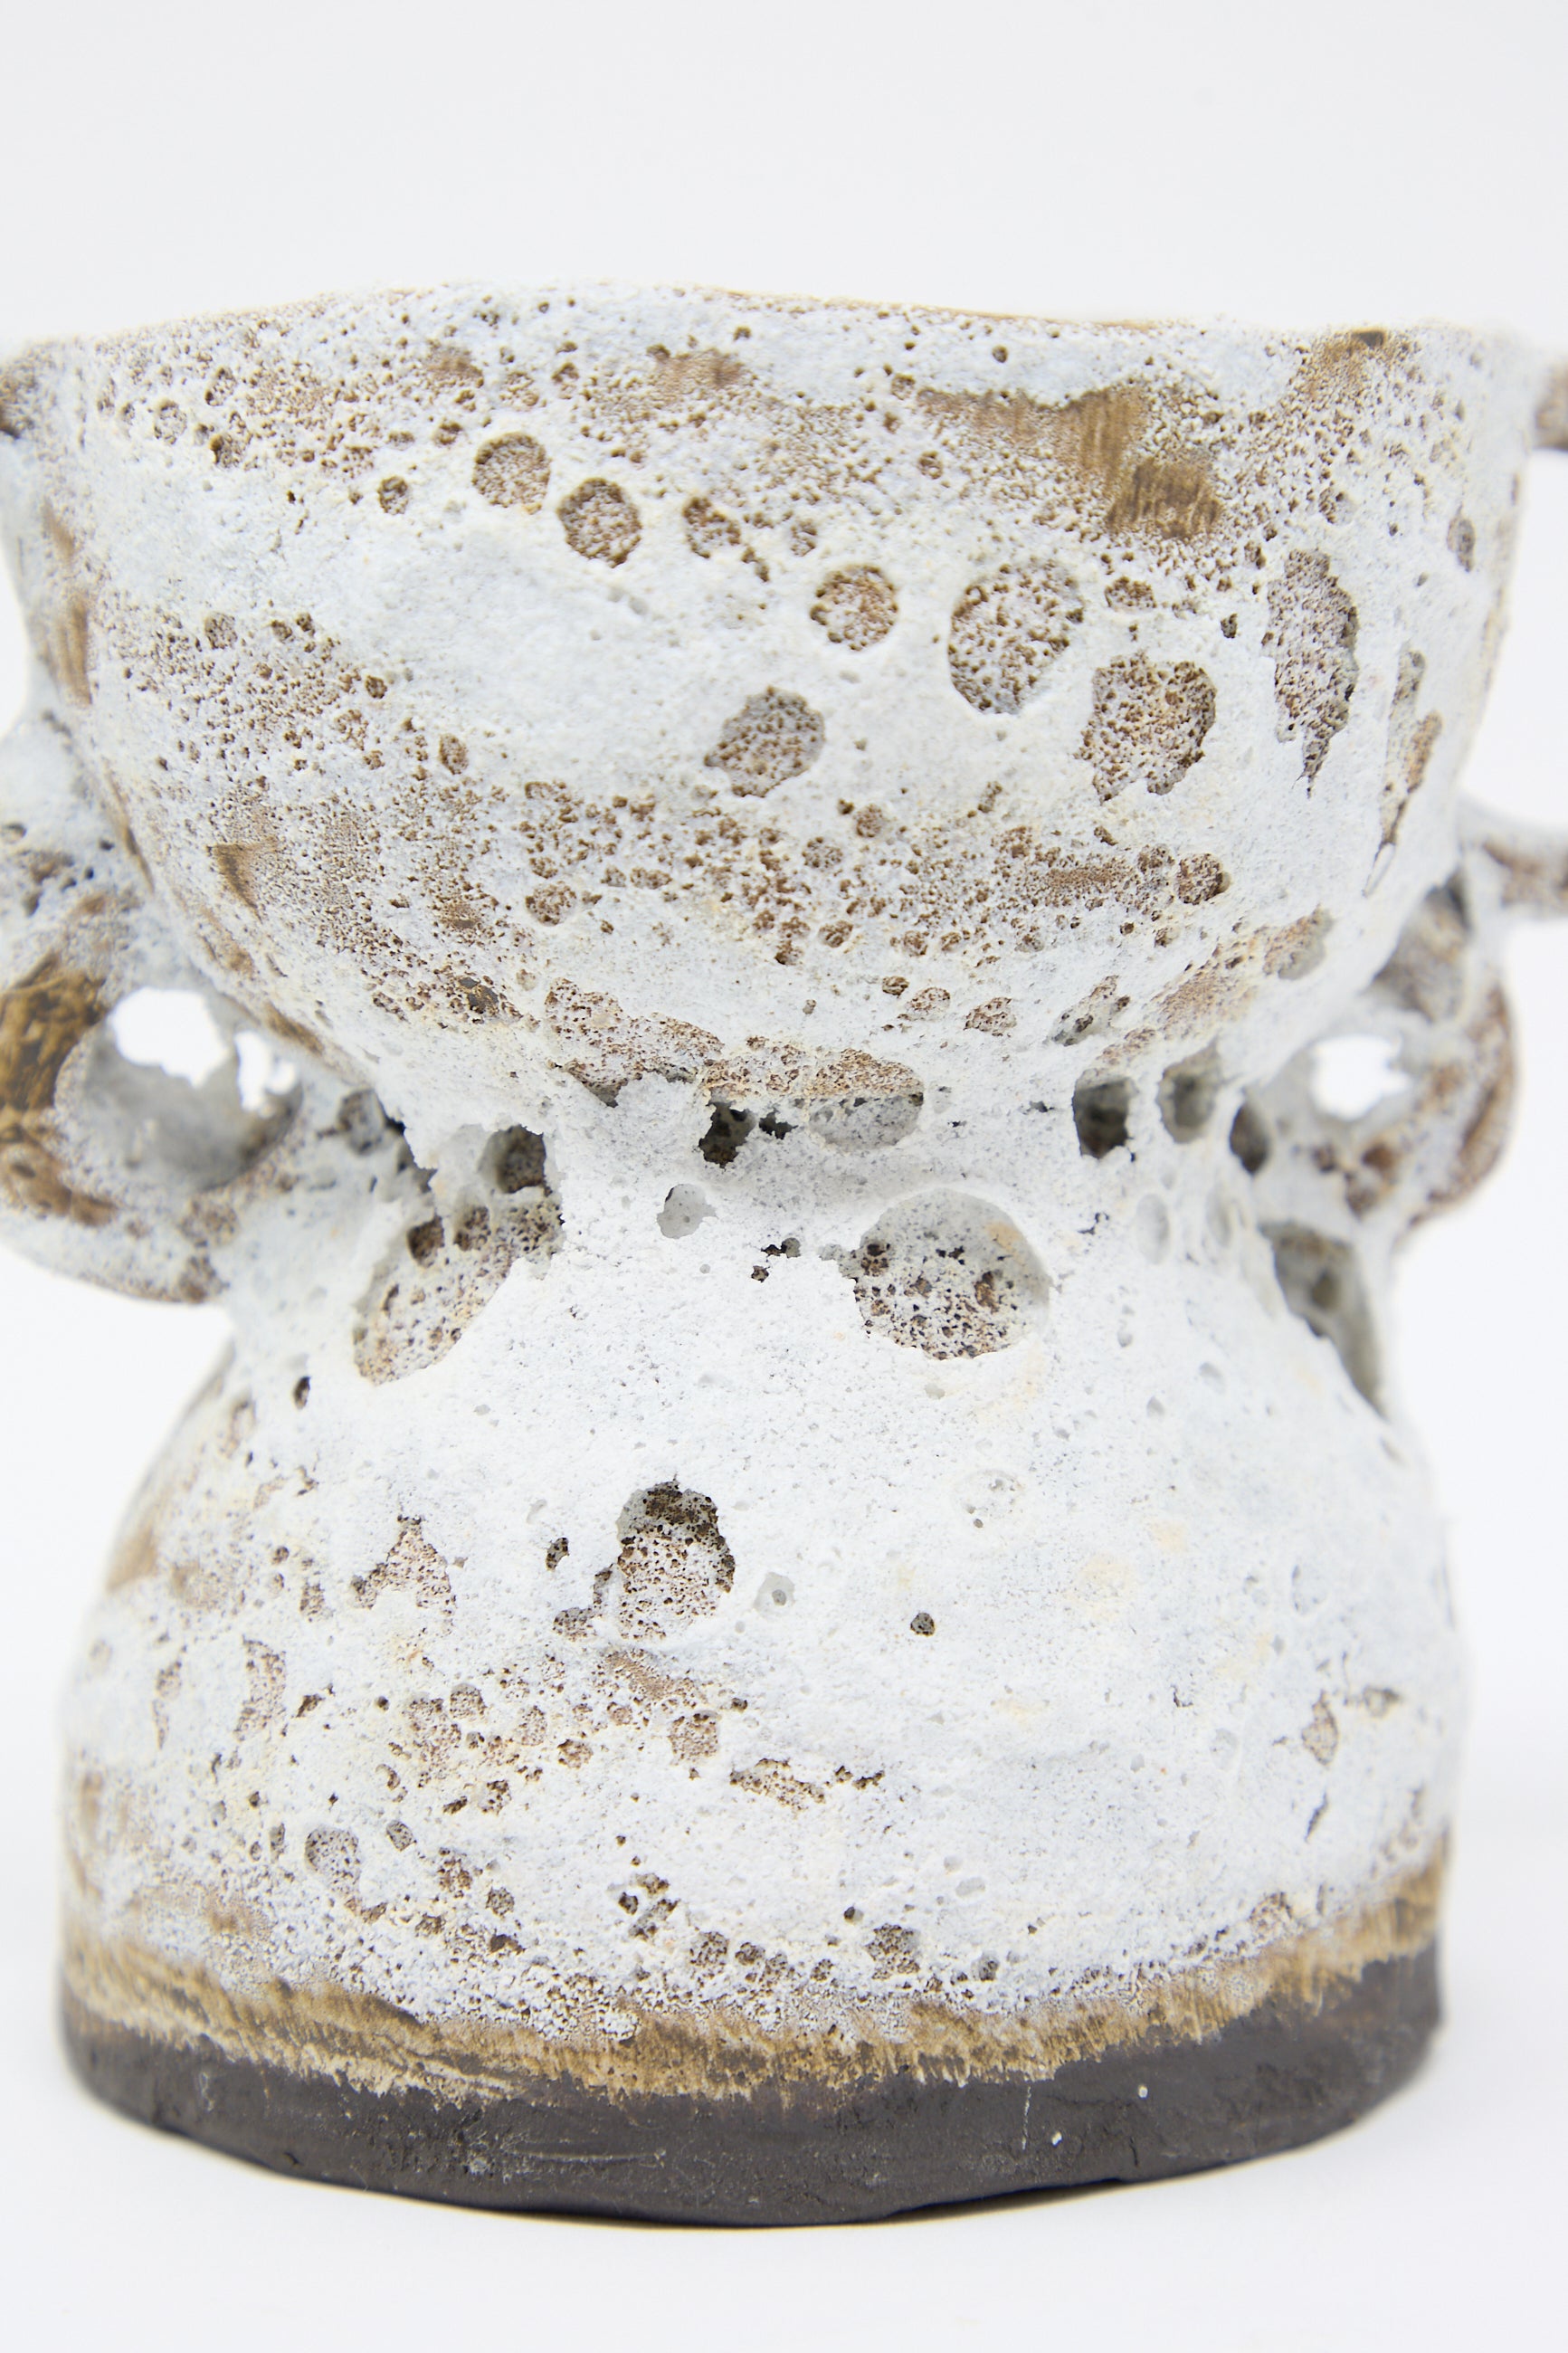 A close-up of The Ancient One Vase by Tania Whalen, showcasing its textured, white and brown stoneware body with a bulbous shape, rough, porous surface, and a tiered design with handles.